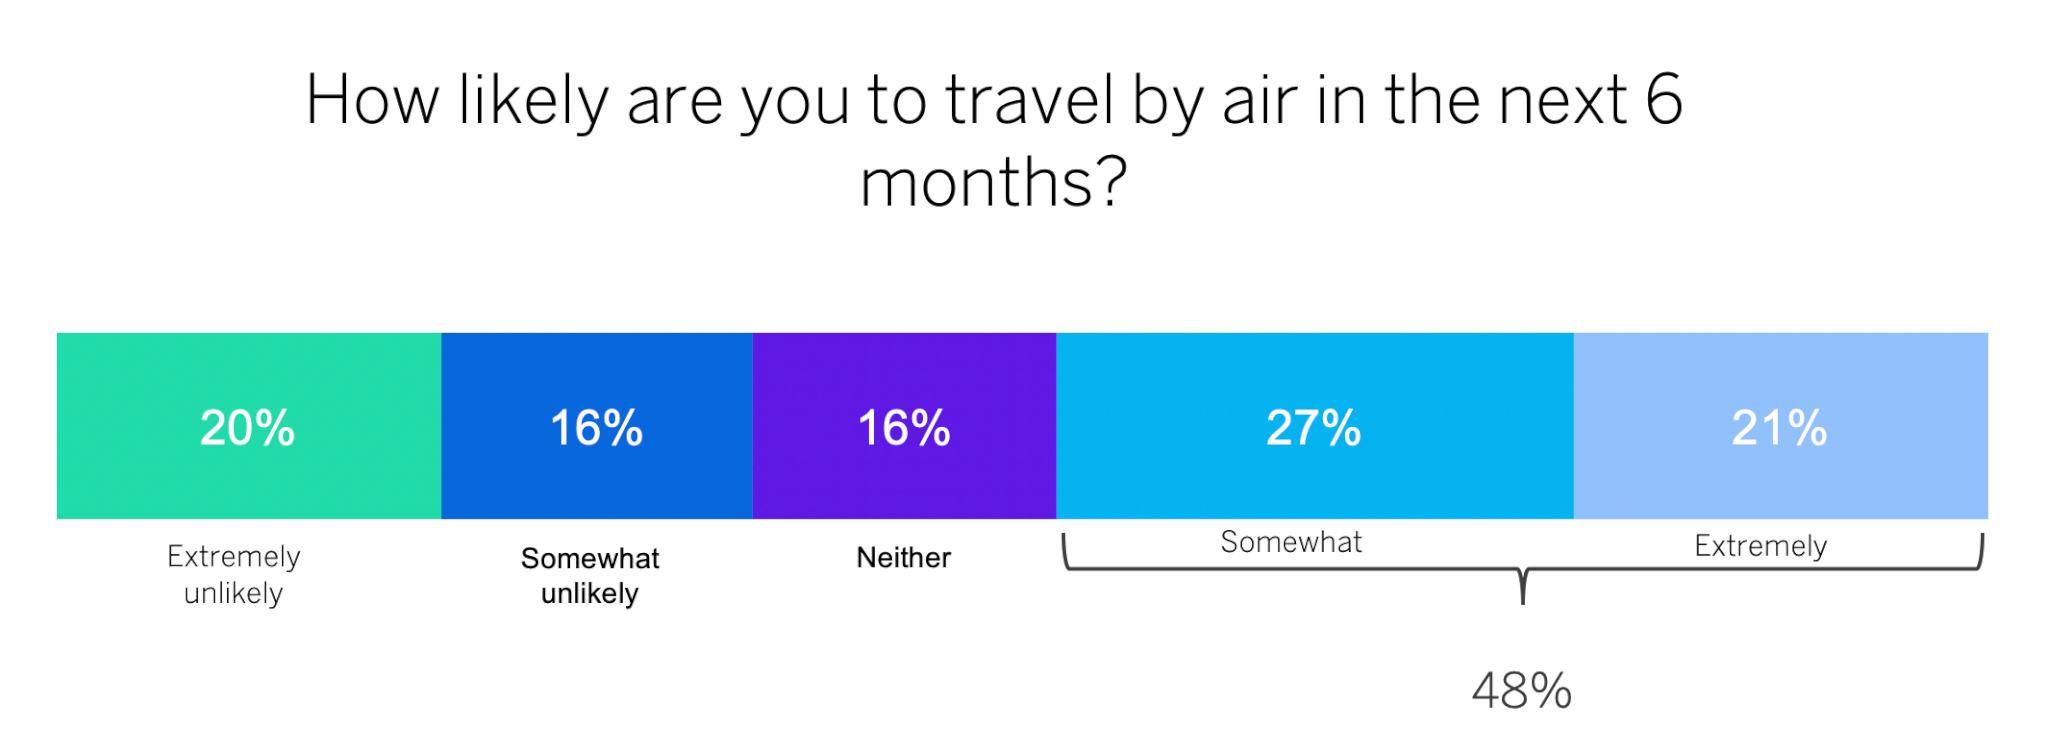 likely to travel